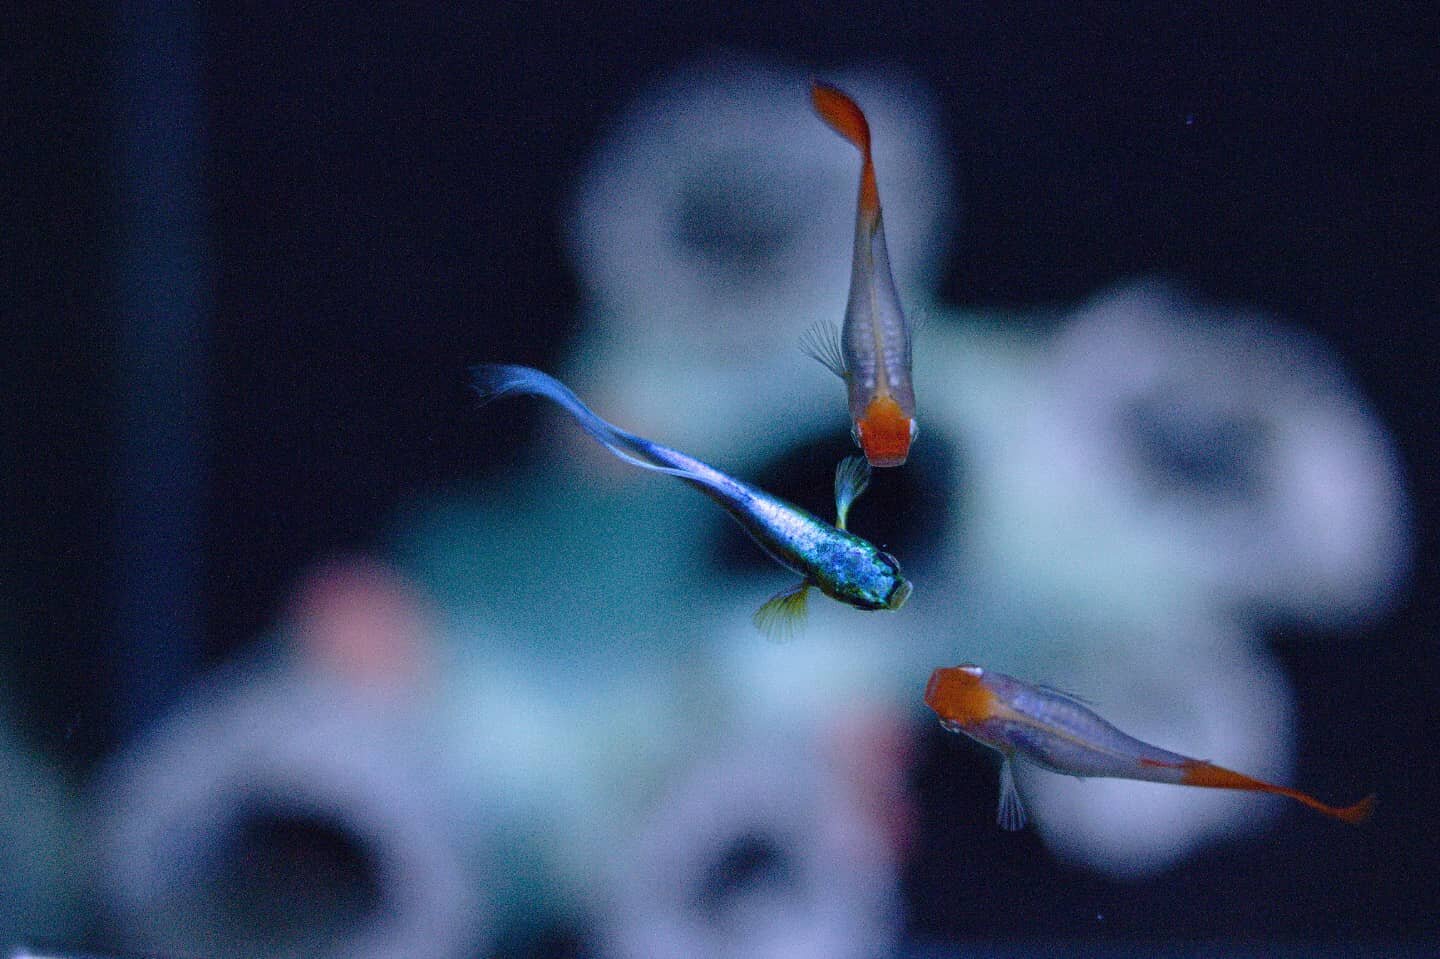 My guppies, from above. One of my personal projects this year was fixing to an aquarium I found on the side of the road. It's been years since I've kept fish, feels good to be back to it.

#Aquarium #guppy #guppies #fish #ShotOnCanon #acuario #fishke